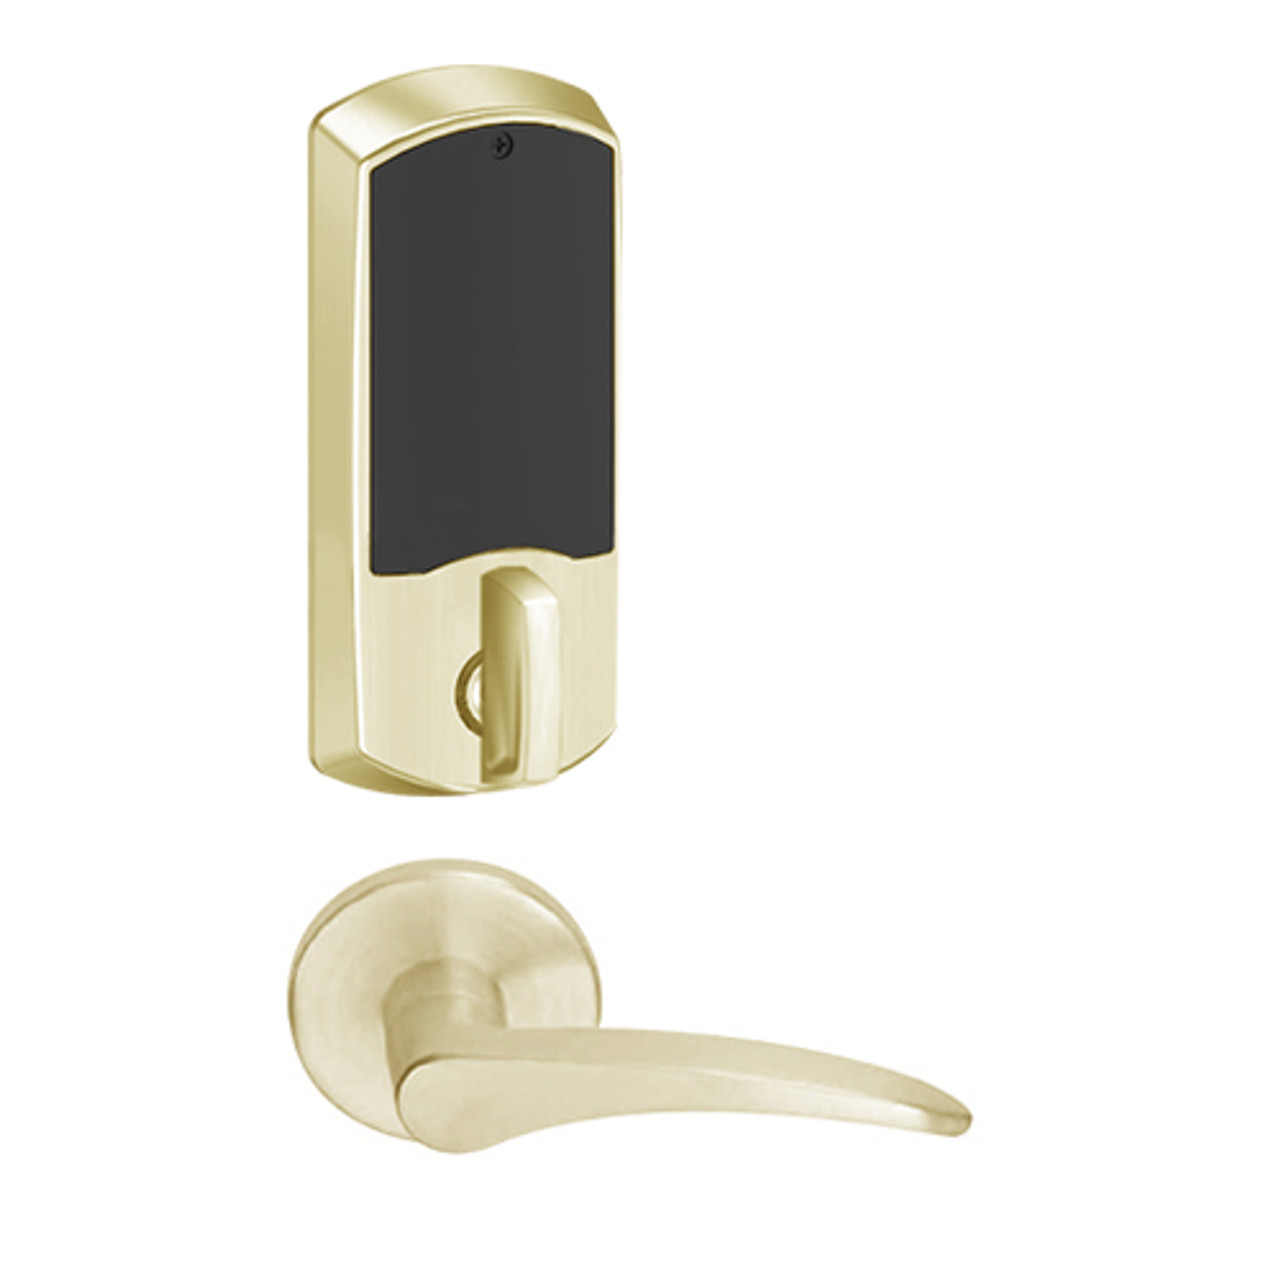 LEMD-GRW-BD-12-606-00C-RH Schlage Privacy/Apartment Wireless Greenwich Mortise Deadbolt Lock with LED and 12 Lever Prepped for SFIC in Satin Brass